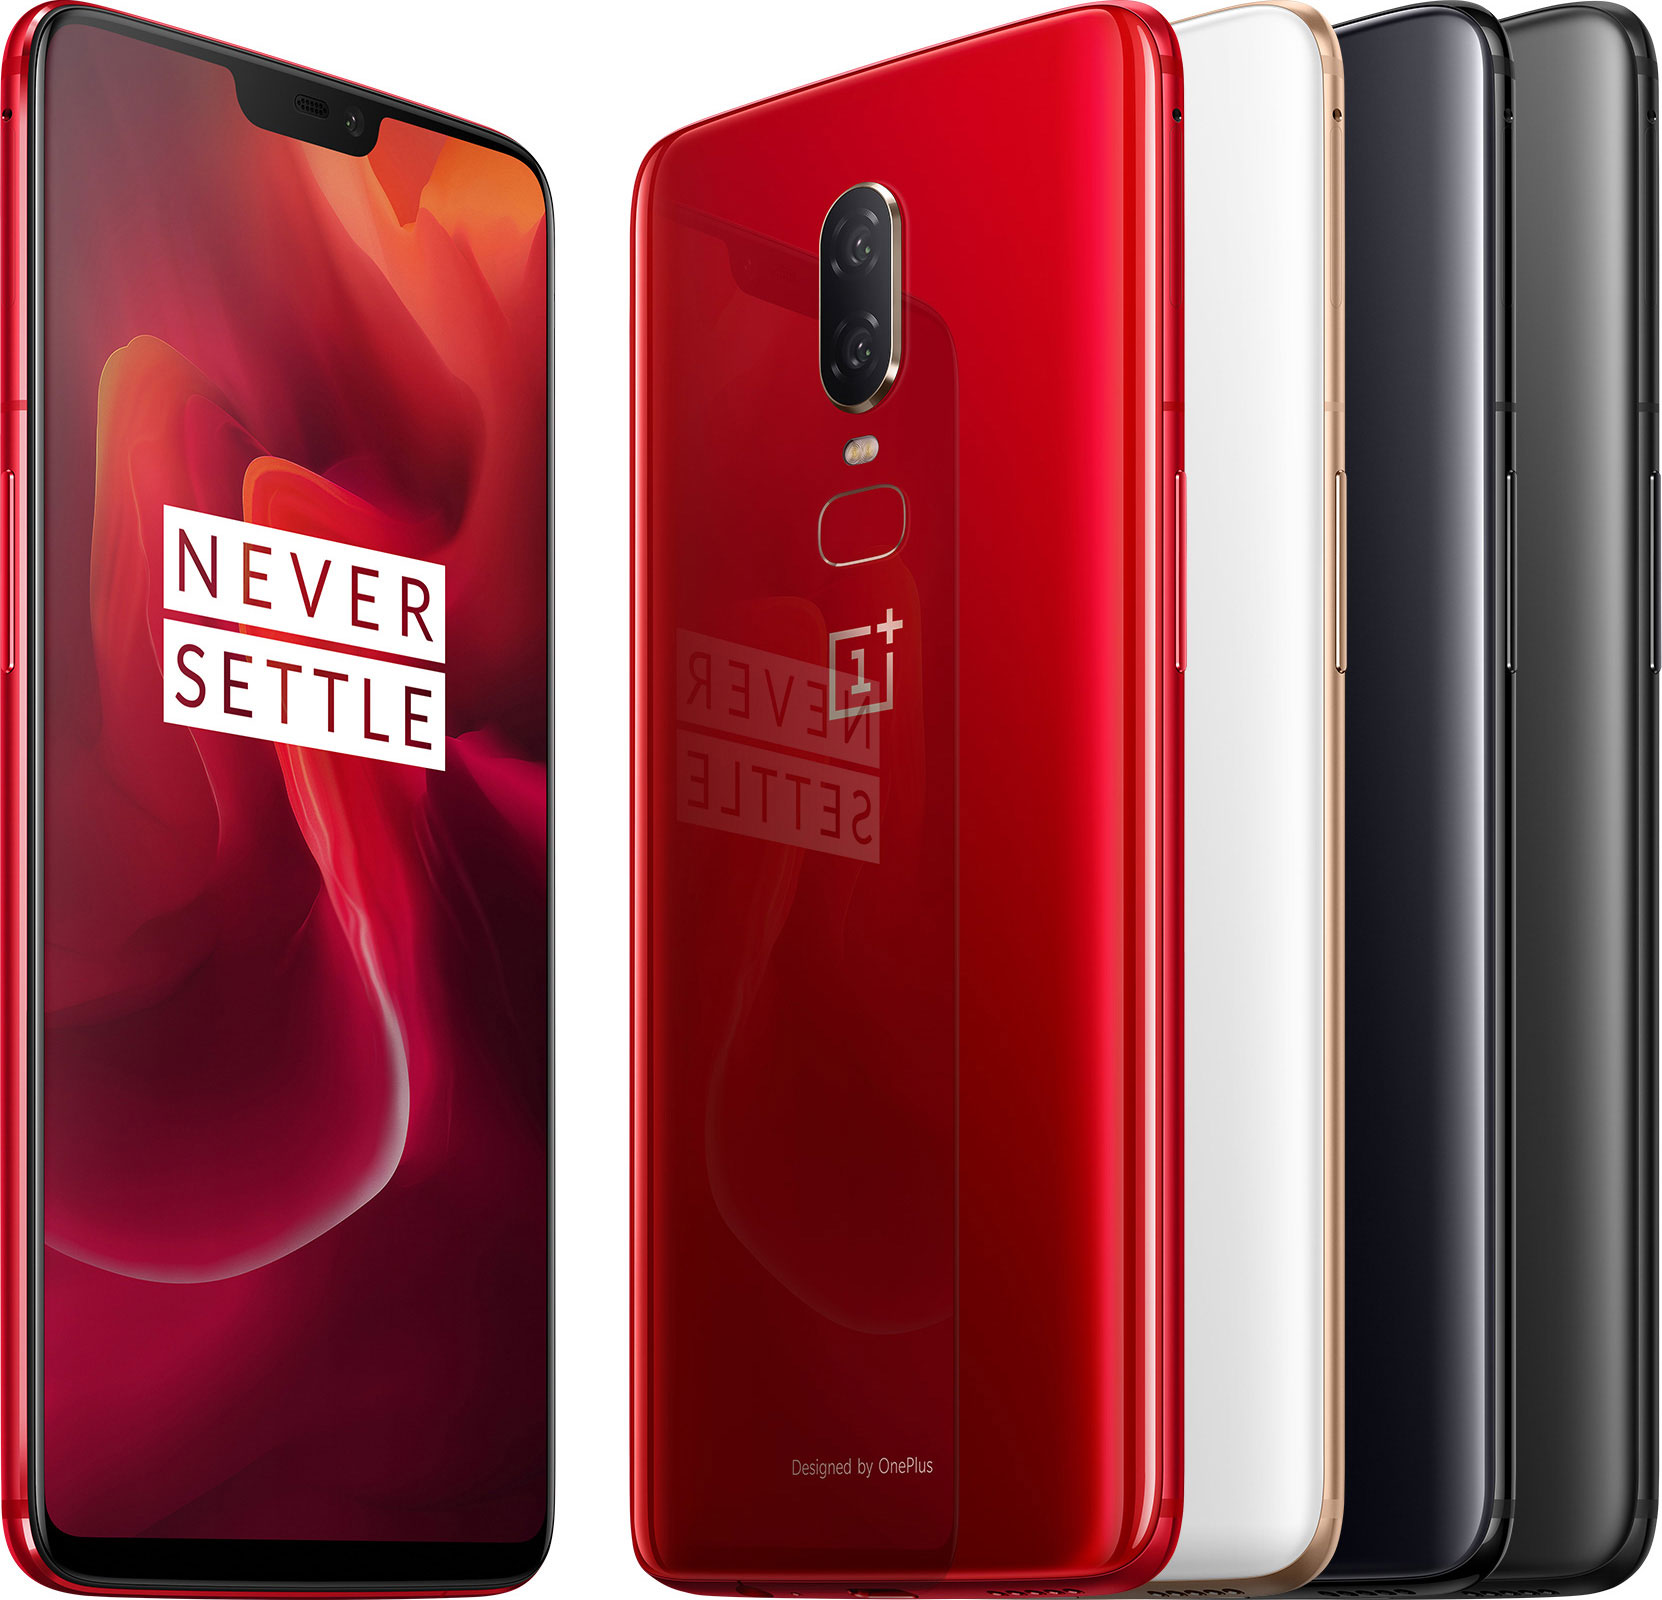 OnePlus 6T purportedly coming T-Mobile October - NotebookCheck.net News